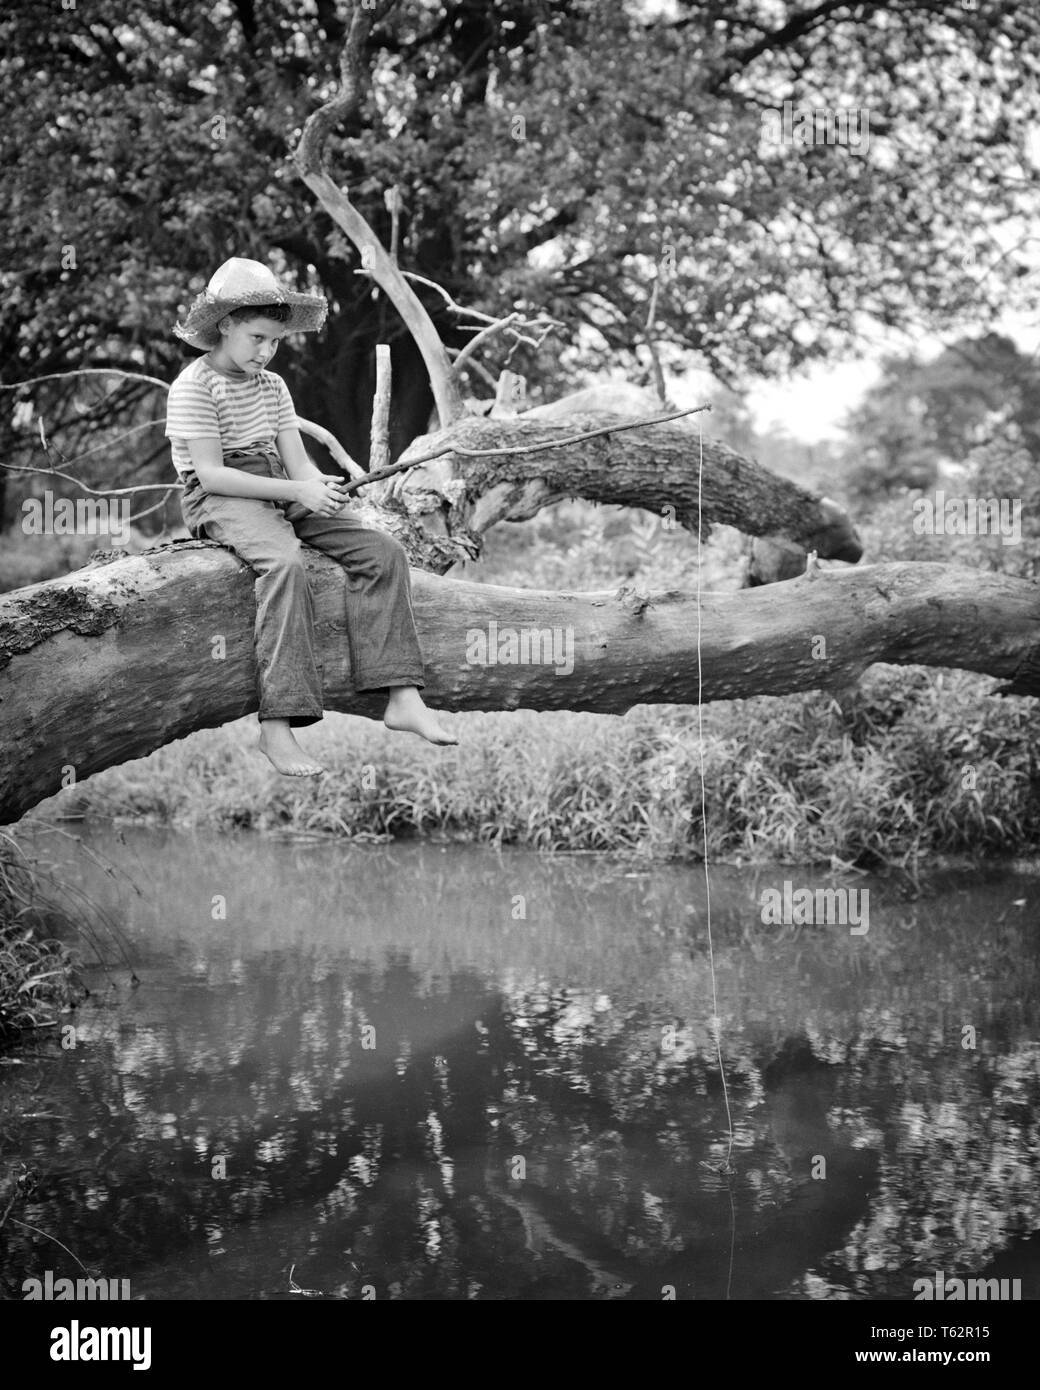 1940s BAREFOOT COUNTRY BOY WEARING BLUE JEANS STRIPED SHIRT AND STRAW HAT SITTING ON A FALLEN TREE OVER A CREEK FISHING  - a64 HAR001 HARS SERENITY B&W SKILL ACTIVITY AMUSEMENT ADVENTURE FALLEN HOBBY LEISURE INTEREST AND HOBBIES KNOWLEDGE RECREATION PASTIME PLEASURE ON BAREFOOT STRAW HAT HUCK FINN T-SHIRT TOM SAWYER BLUE JEANS HUCKLEBERRY FINN JUVENILES RELAXATION AMATEUR BLACK AND WHITE CAUCASIAN ETHNICITY CREEK ENJOYMENT HAR001 OLD FASHIONED Stock Photo